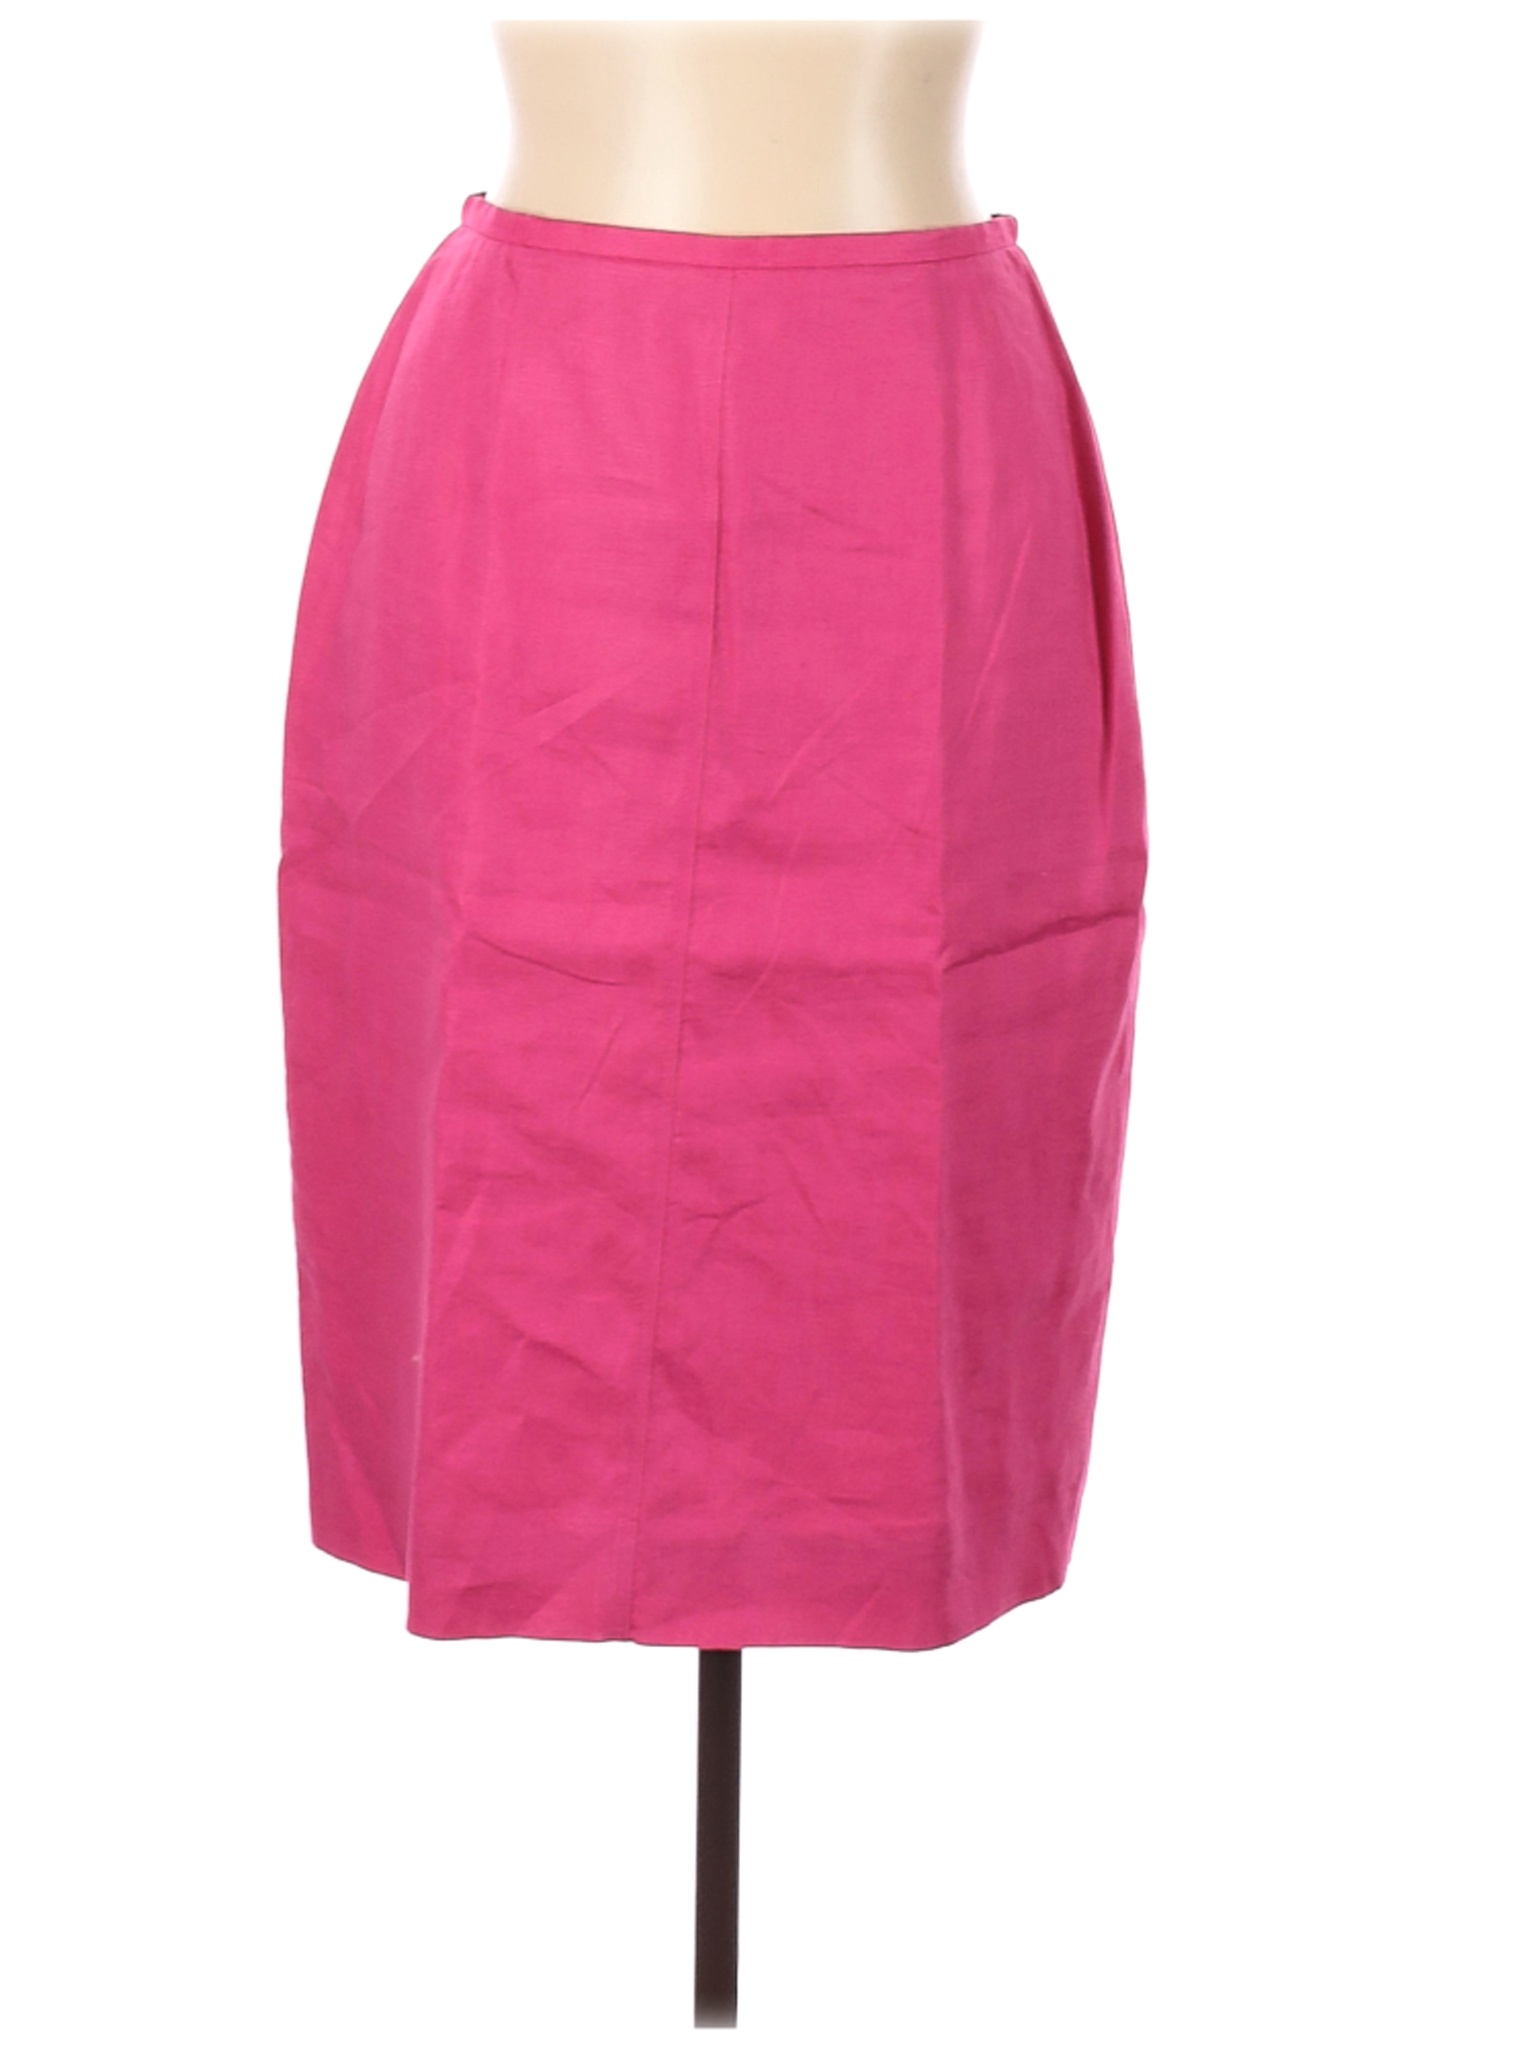 Jh Collectibles Women Pink Casual Skirt 12 | eBay